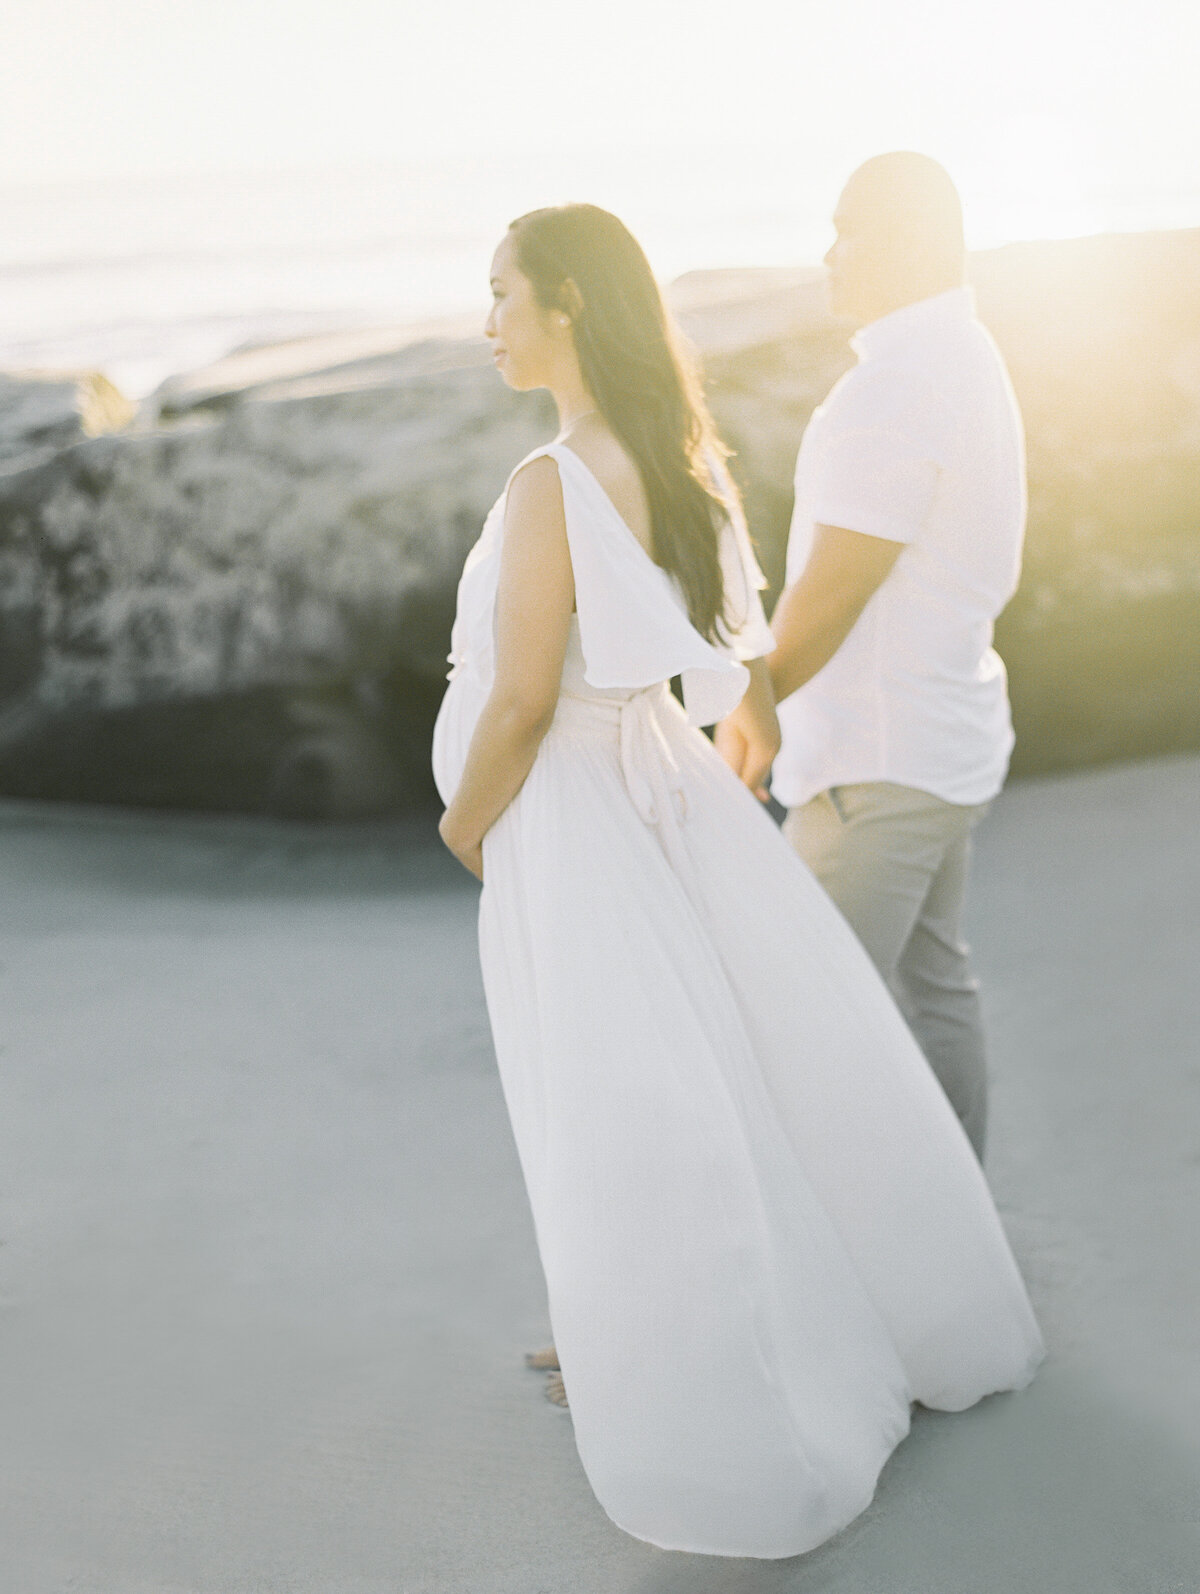 San-Diego-Maternity-Photography-Beach-Babsie-Baby-Photography-Couple-White-Dress-02